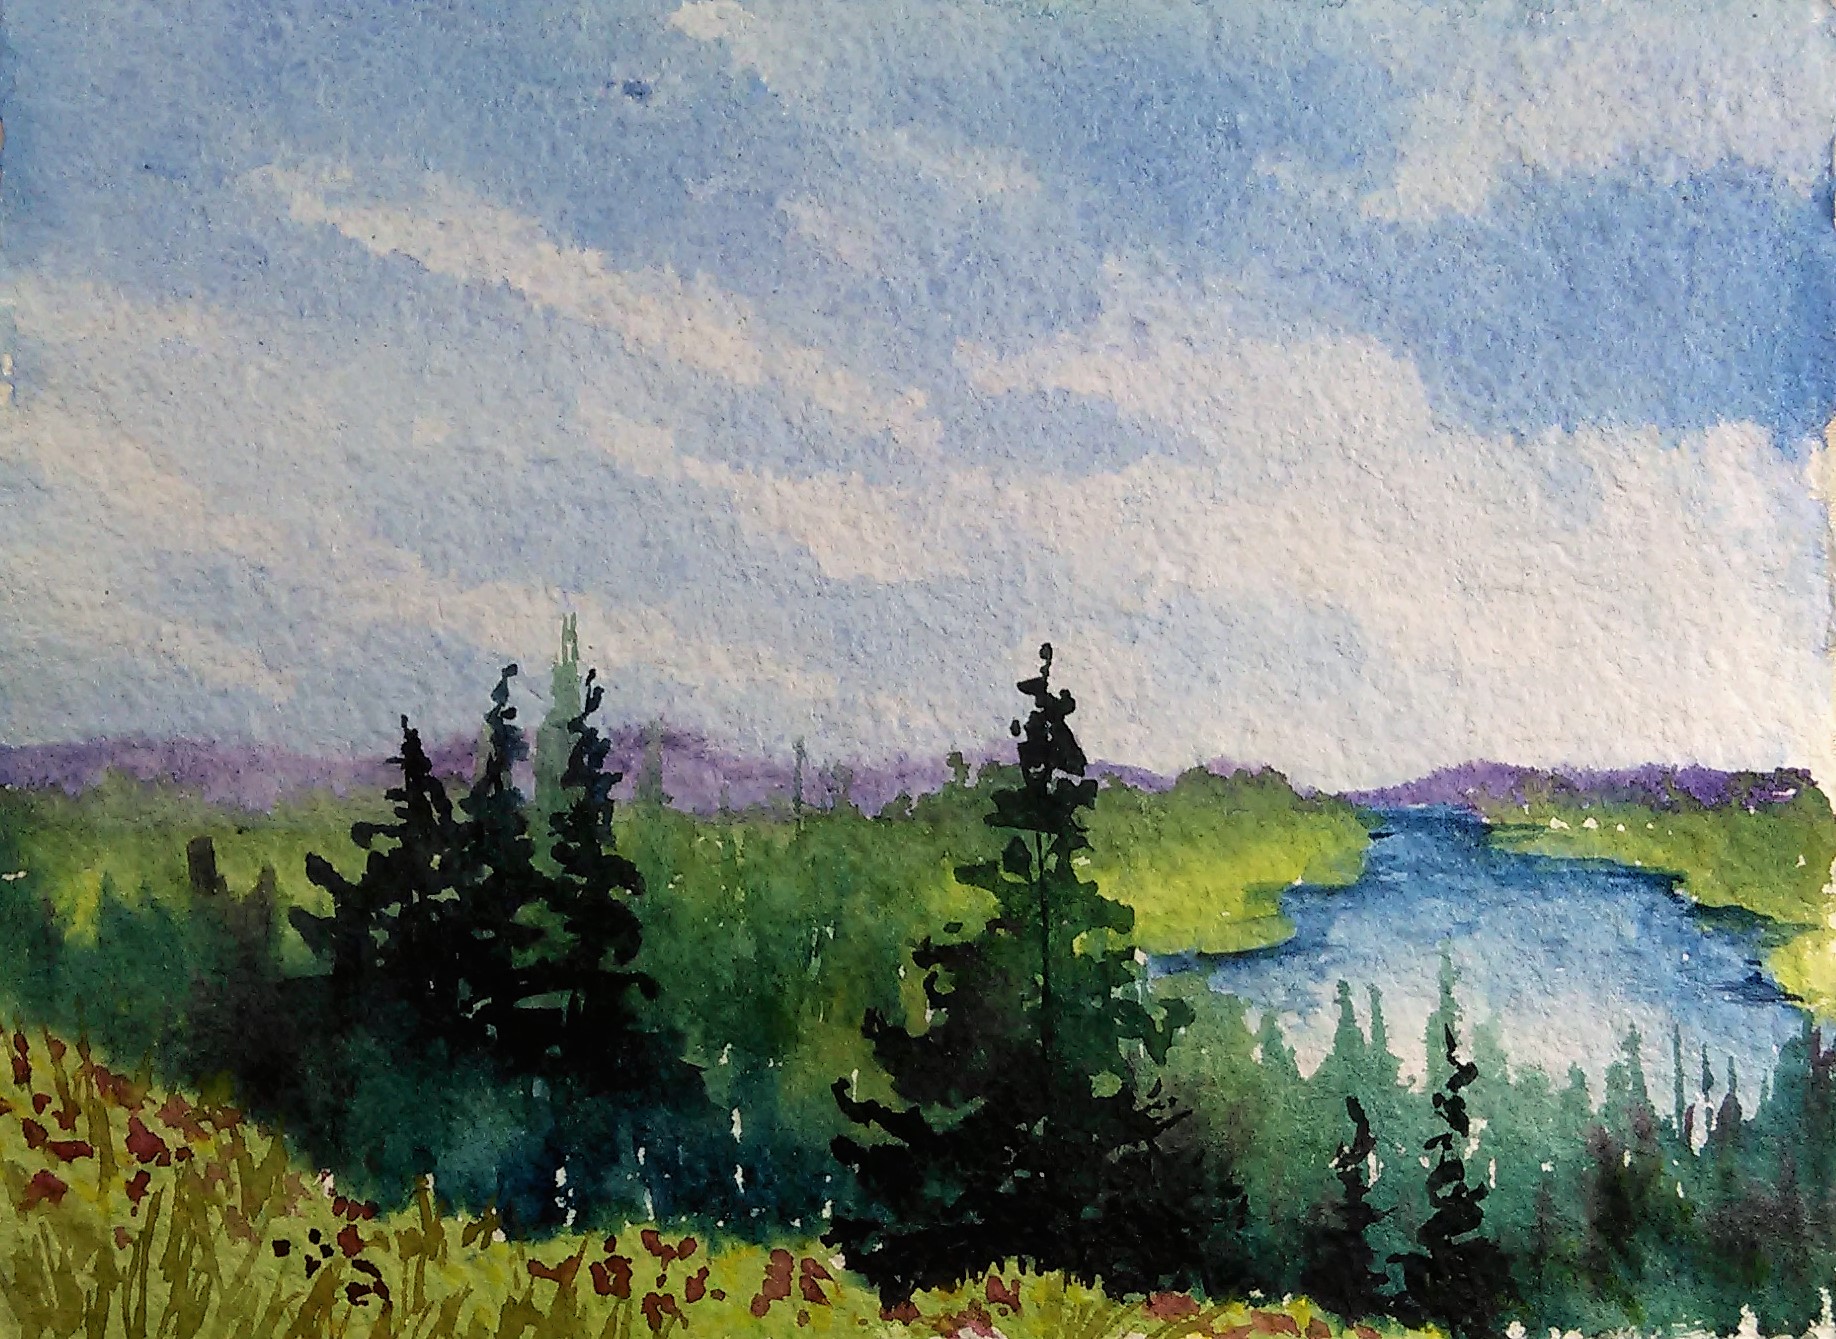 Easy Landscape Watercolor Painting Projects to Inspire Creativity插图3